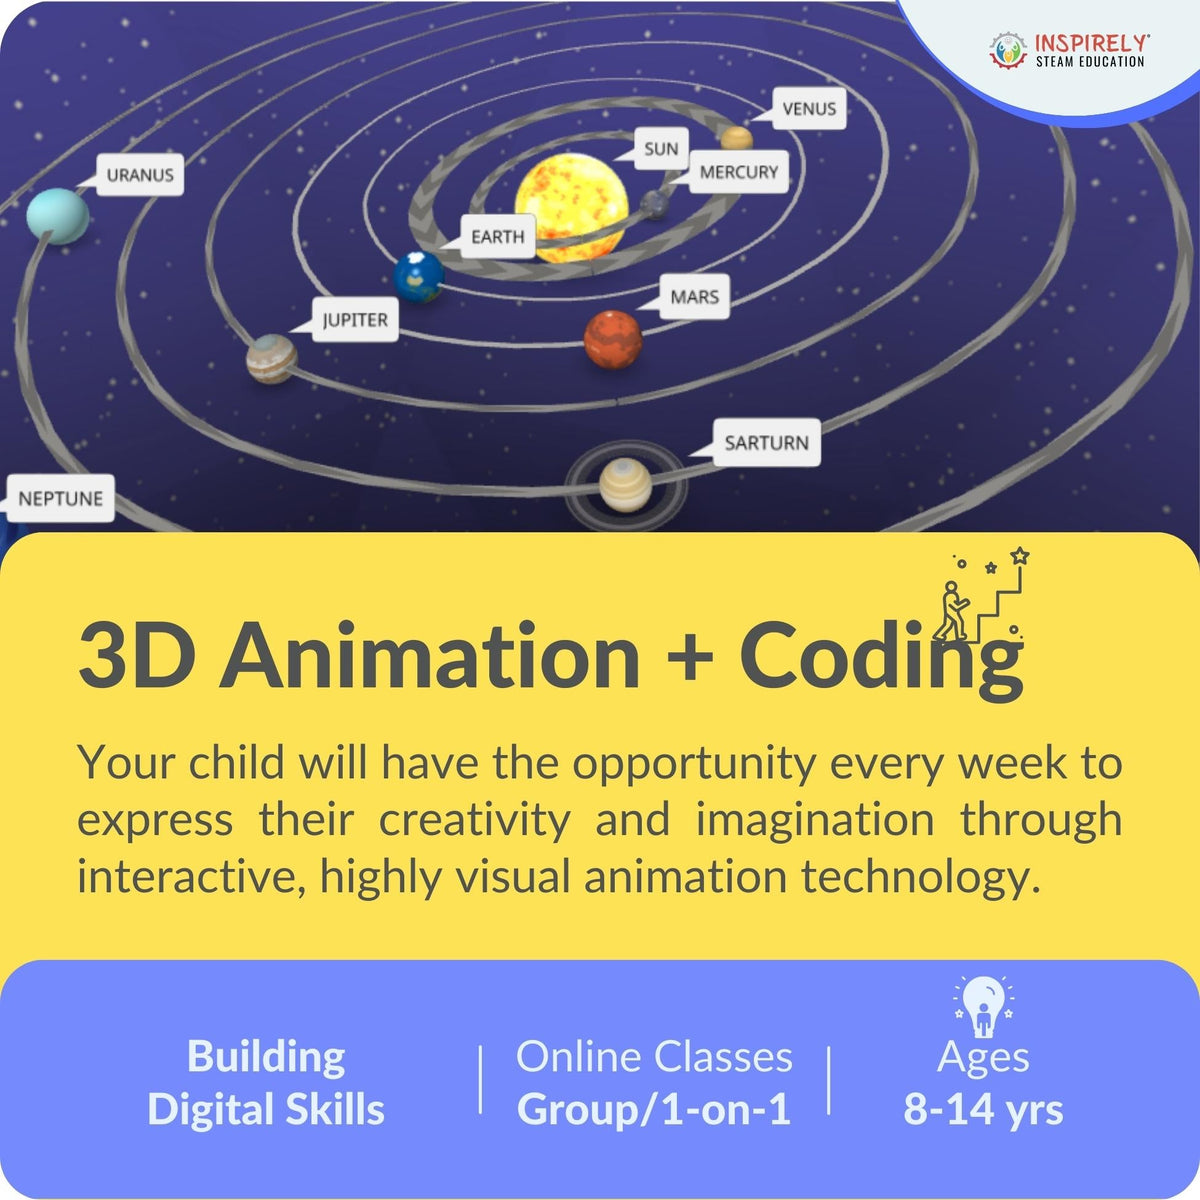 INSPIRELY Canada &amp; USA 3D Animation with coding tutoring Online classes for kids Children ages 8-14 years Live Canadian educators INSPIRELY | STEAM education Fun and interactive classes Imagination come to life Basic coding skills Experienced instructors Creative learning experience Targeted towards parents &amp; schools brampton, Mississauga georgetown orangeville caledon cambridge ontario kitchener waterloo  Edit alt text